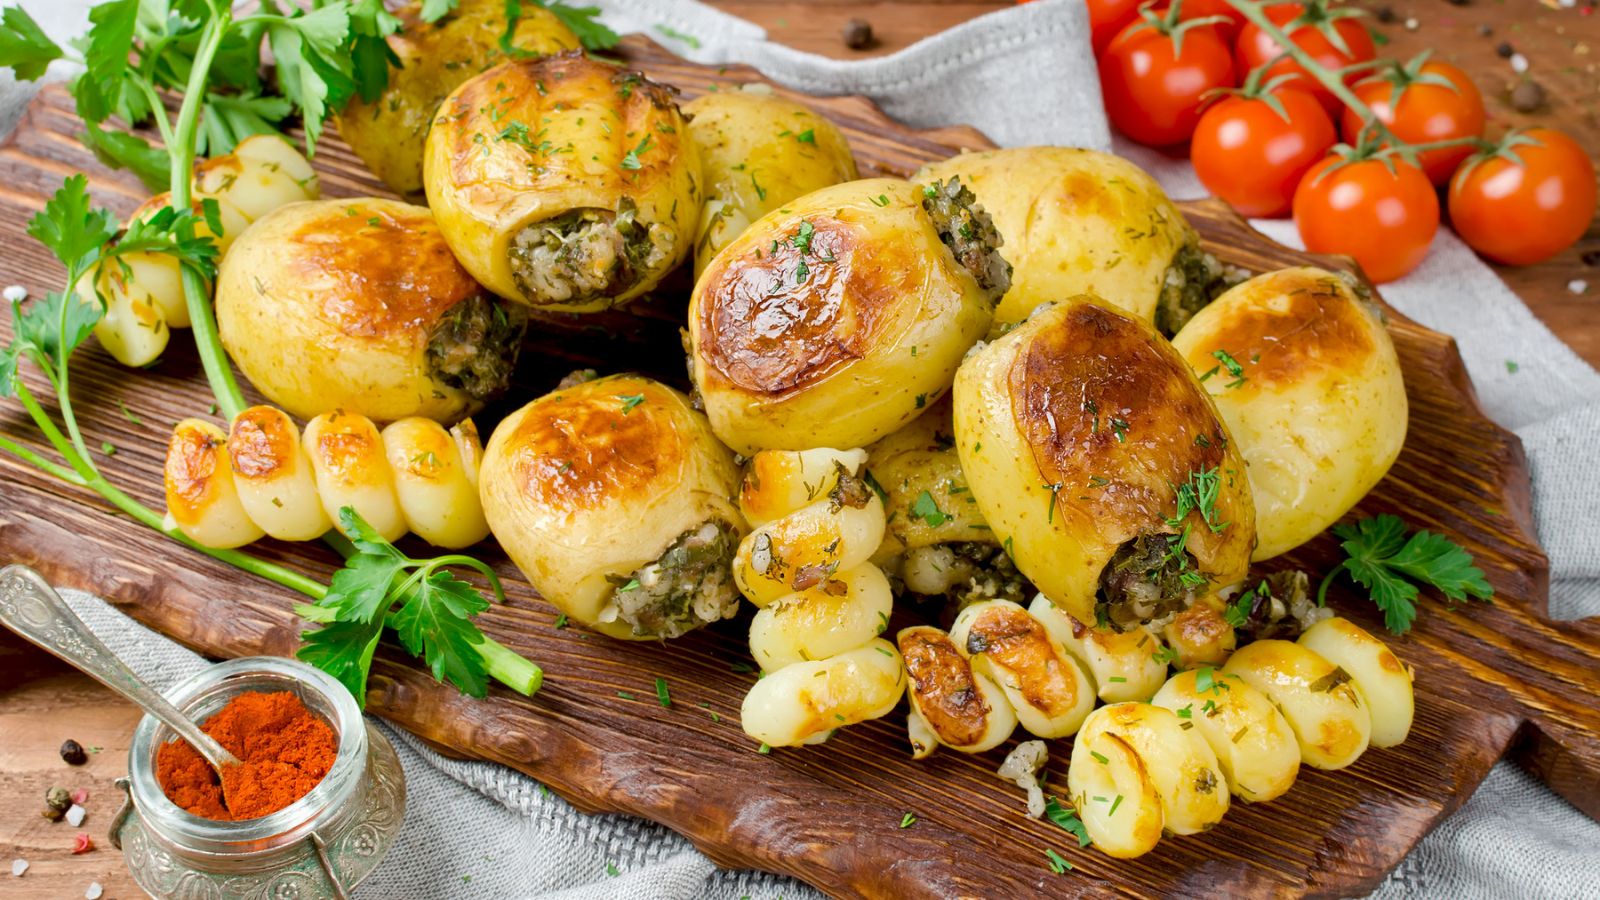 Battle Dinner Boredom with These 22 Incredible Potato Recipes